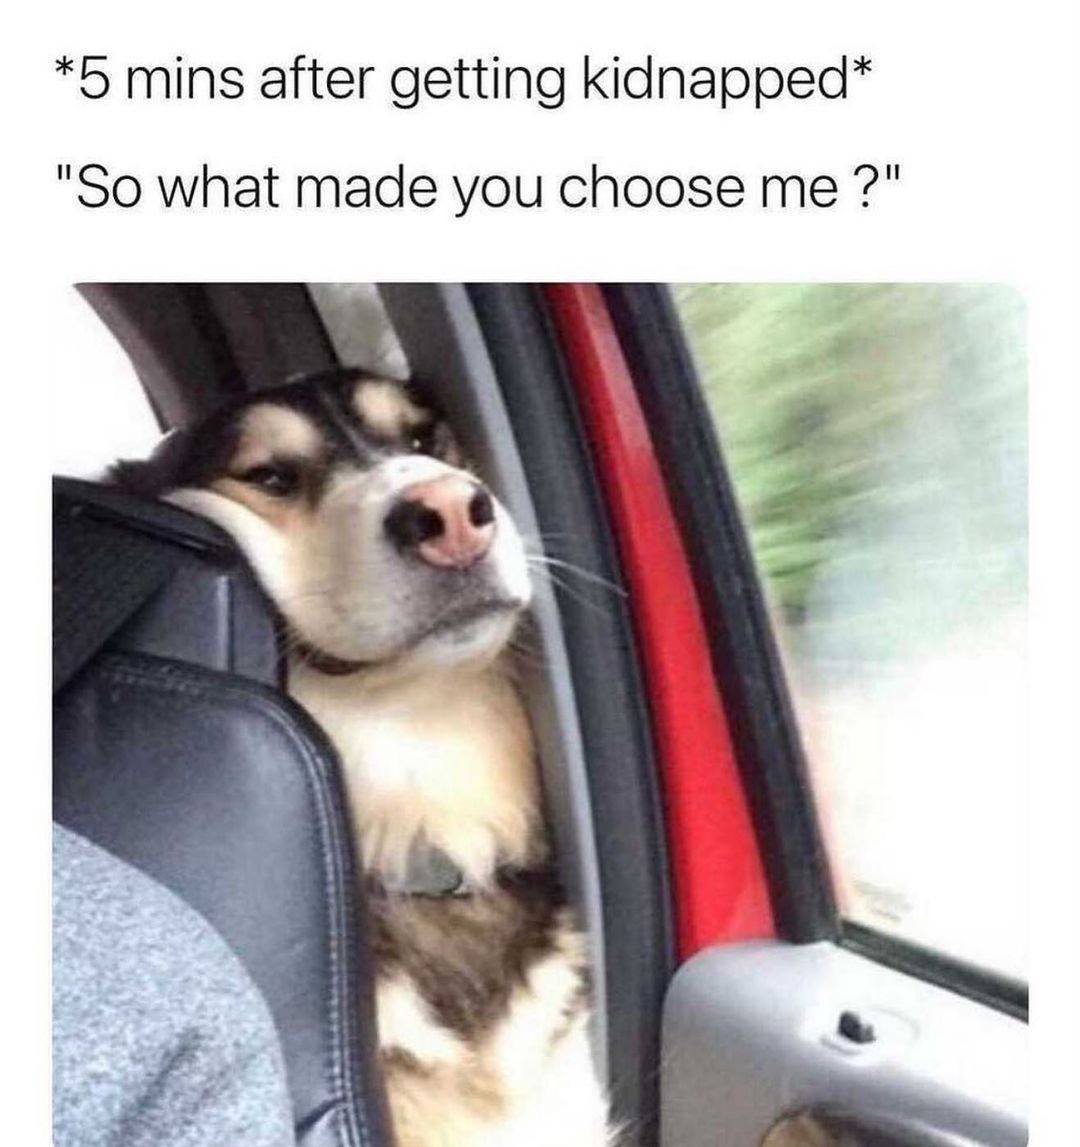 5 minutes after getting kidnapped, so what made you choose me?, meme